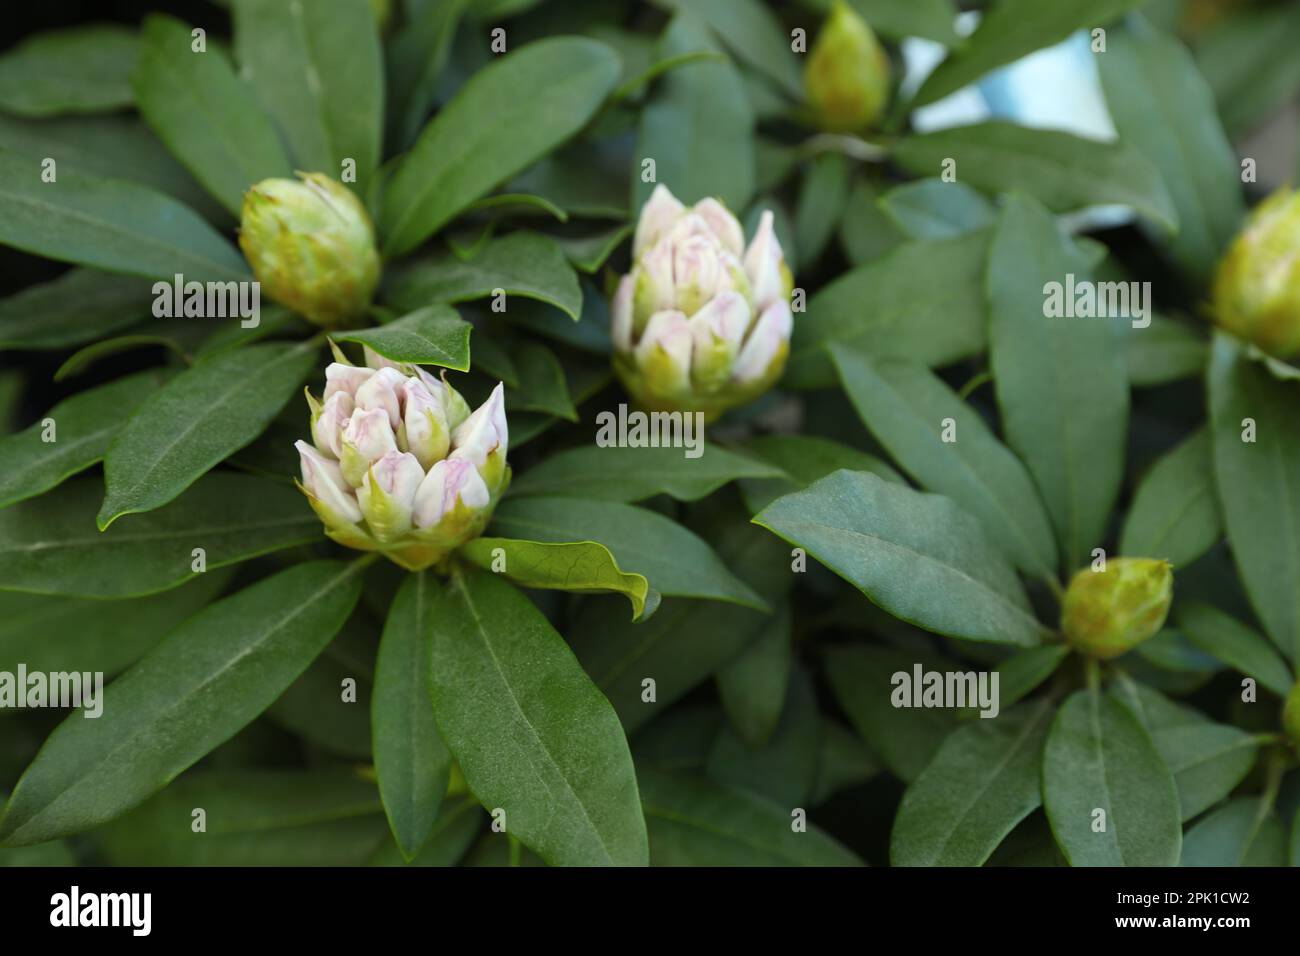 Closeup view of beautiful rhododendron plant with white flowers Stock Photo